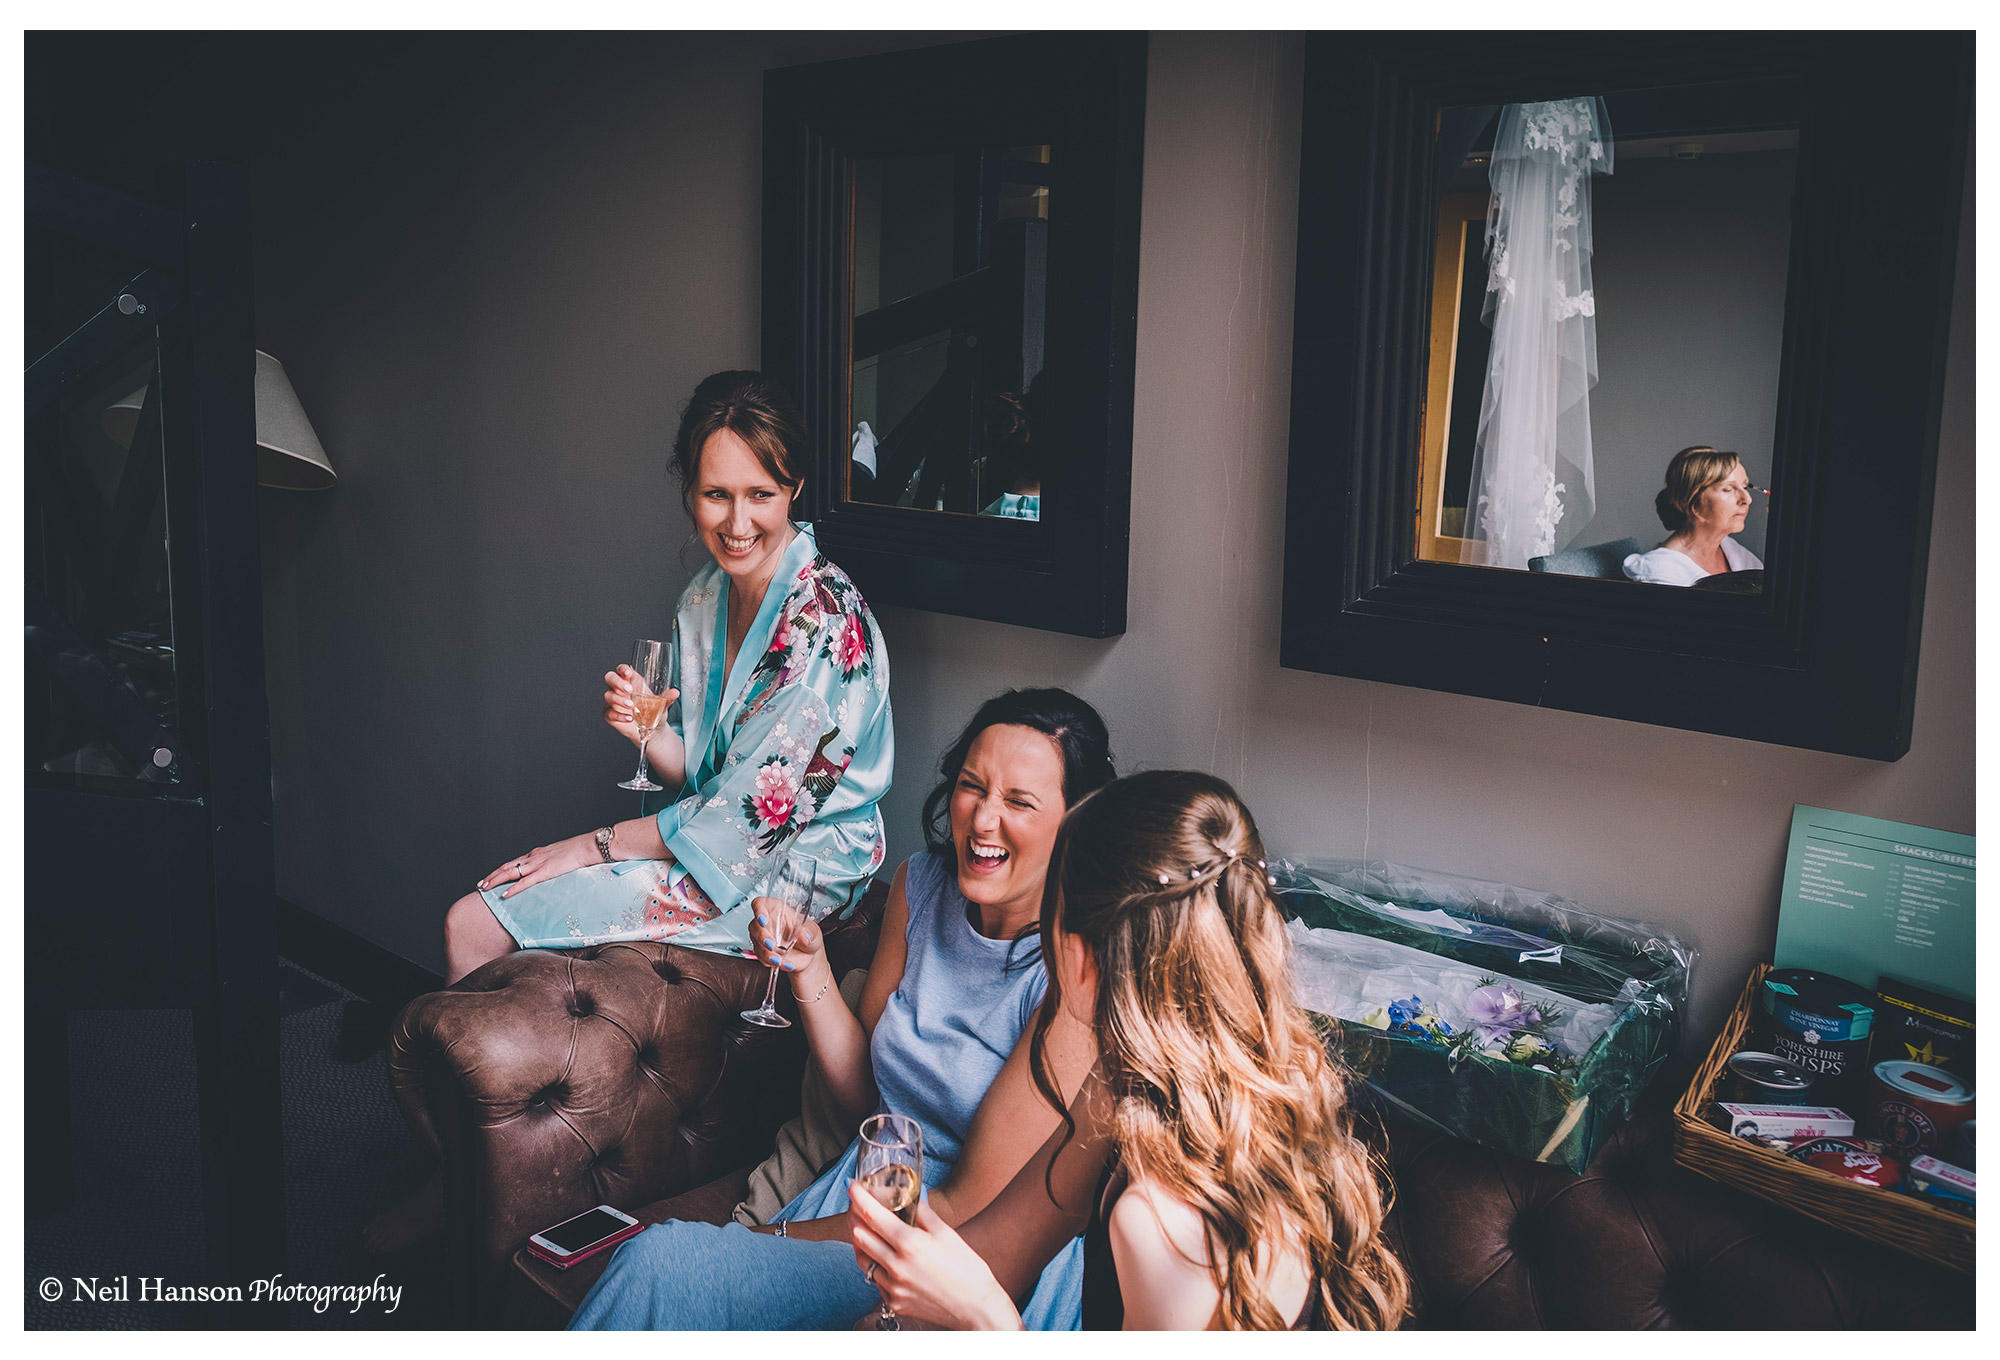 Bride and her bridesmaids enjoying Champaign during the morning preparations